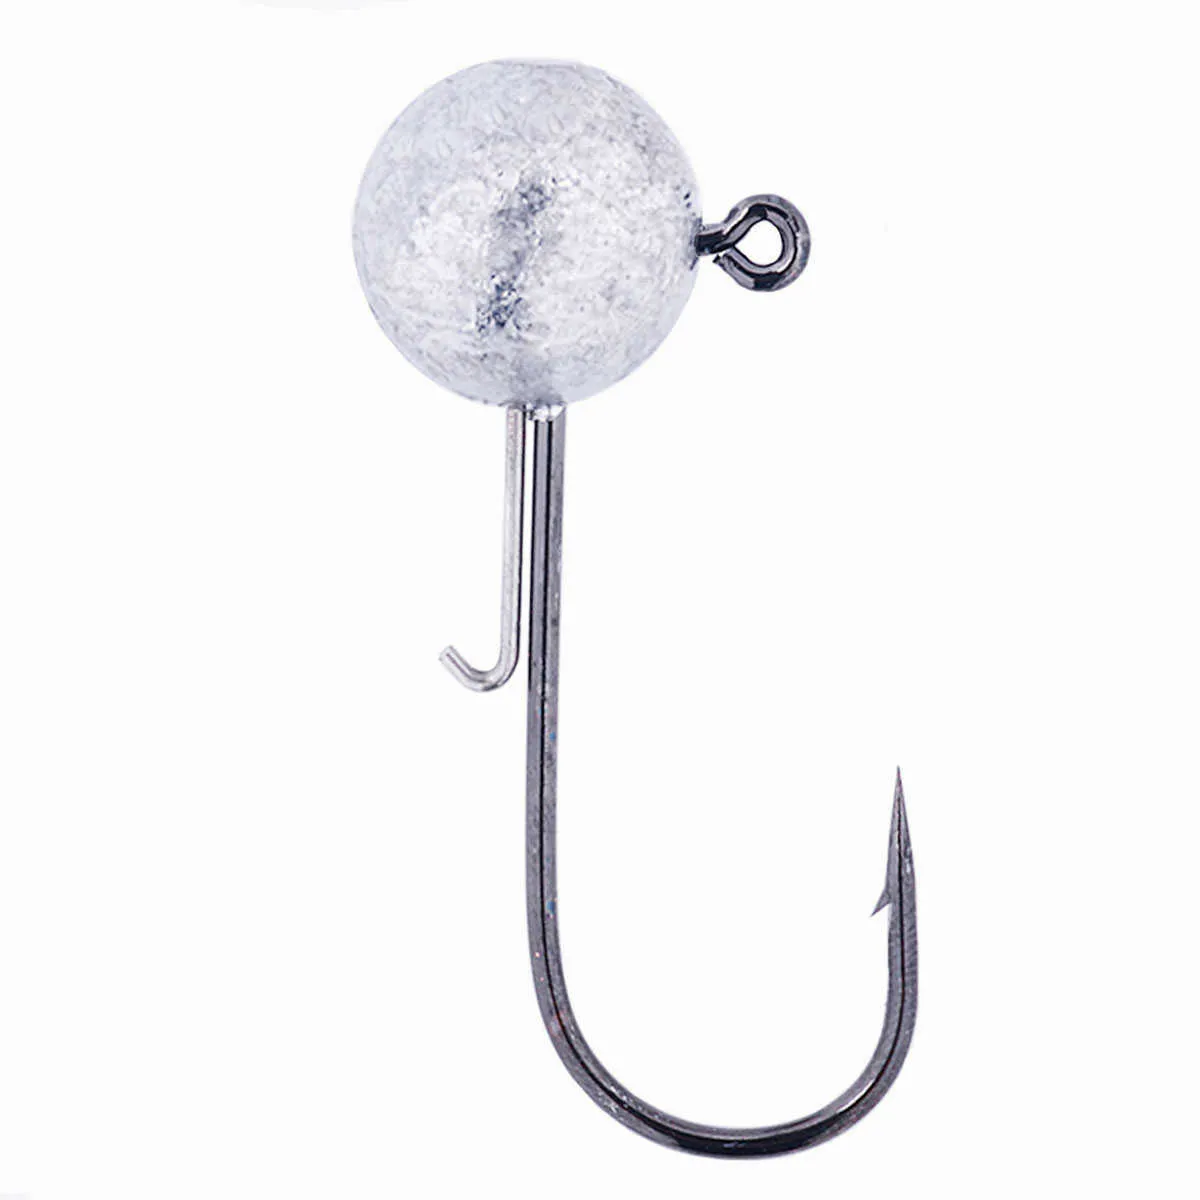 Weedless Jig Head Worm Ice Fishing Hooks Round Ball Jigs With Soft Hook  Accessories 20g 1.5g P230317 From Mengyang10, $13.99